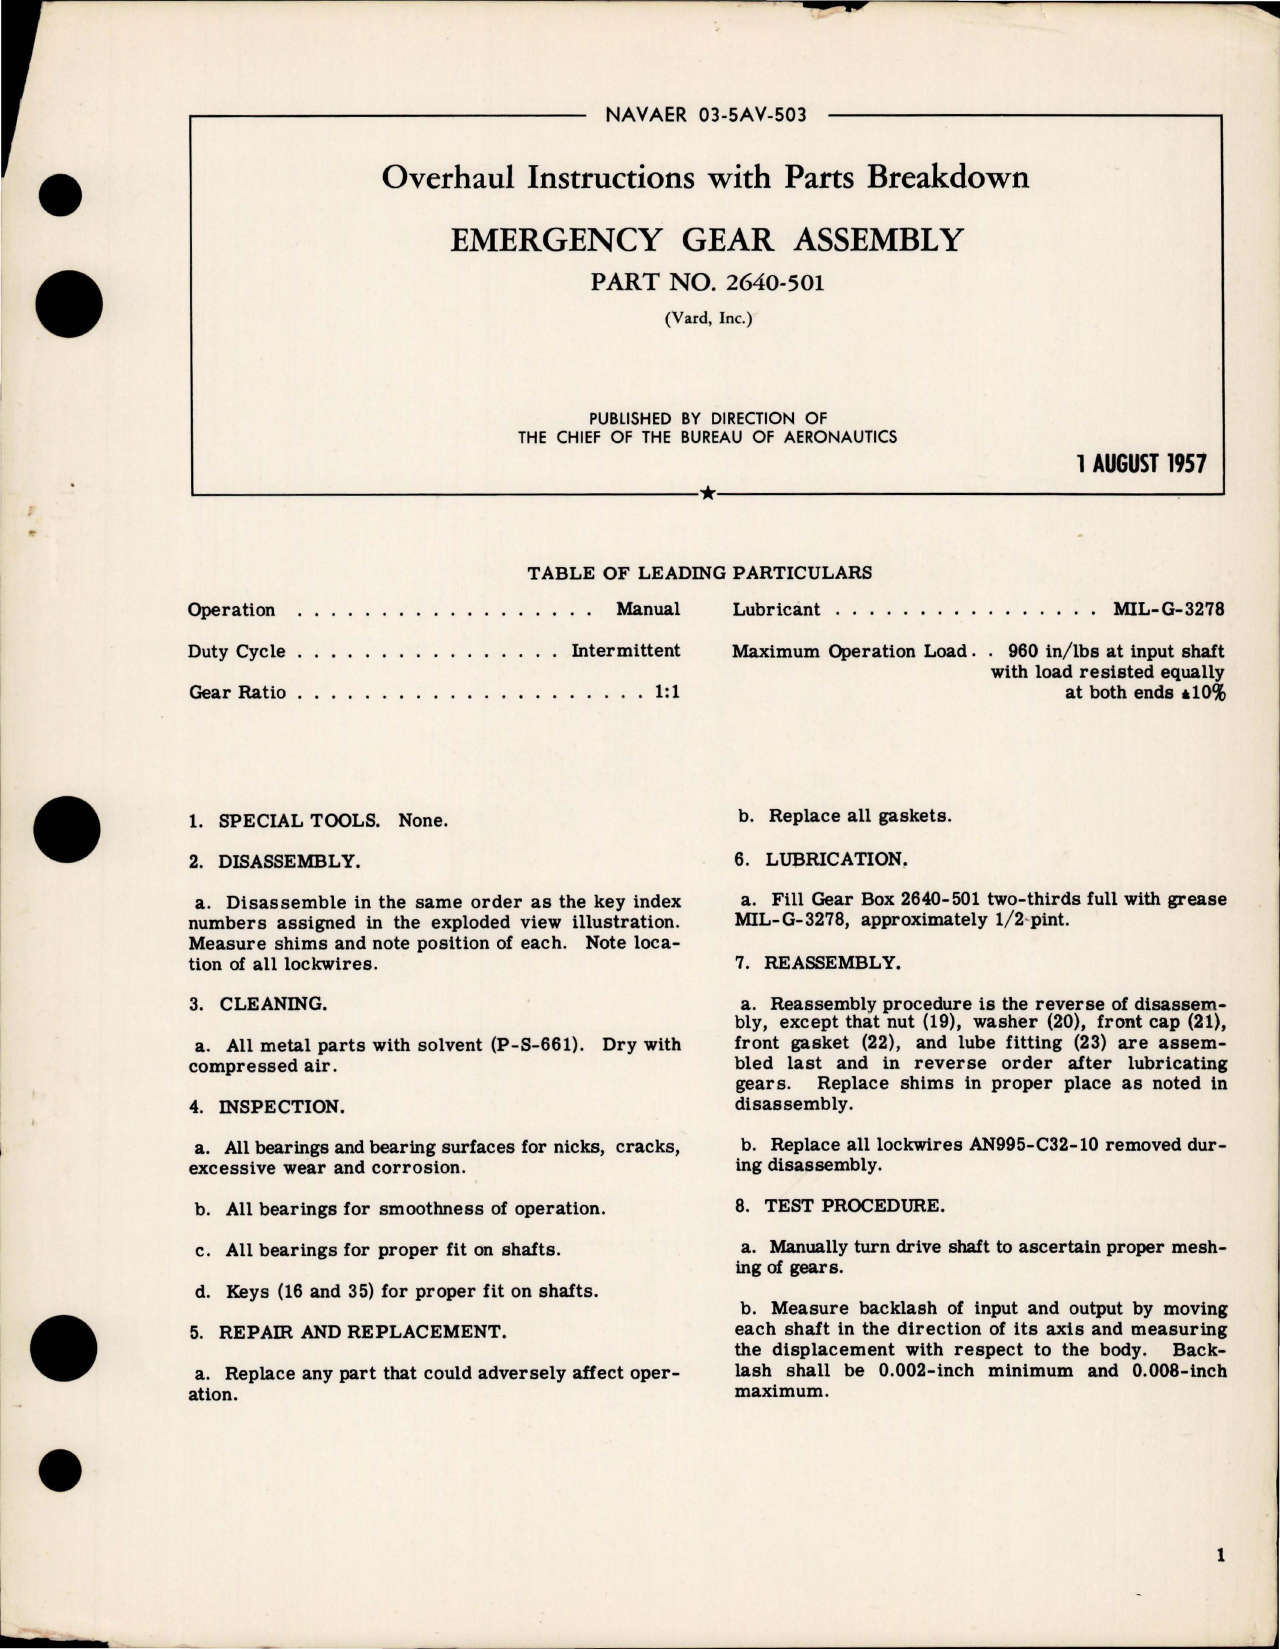 Sample page 1 from AirCorps Library document: Overhaul Instructions with Parts for Emergency Gear Assembly - Part 2640-501 